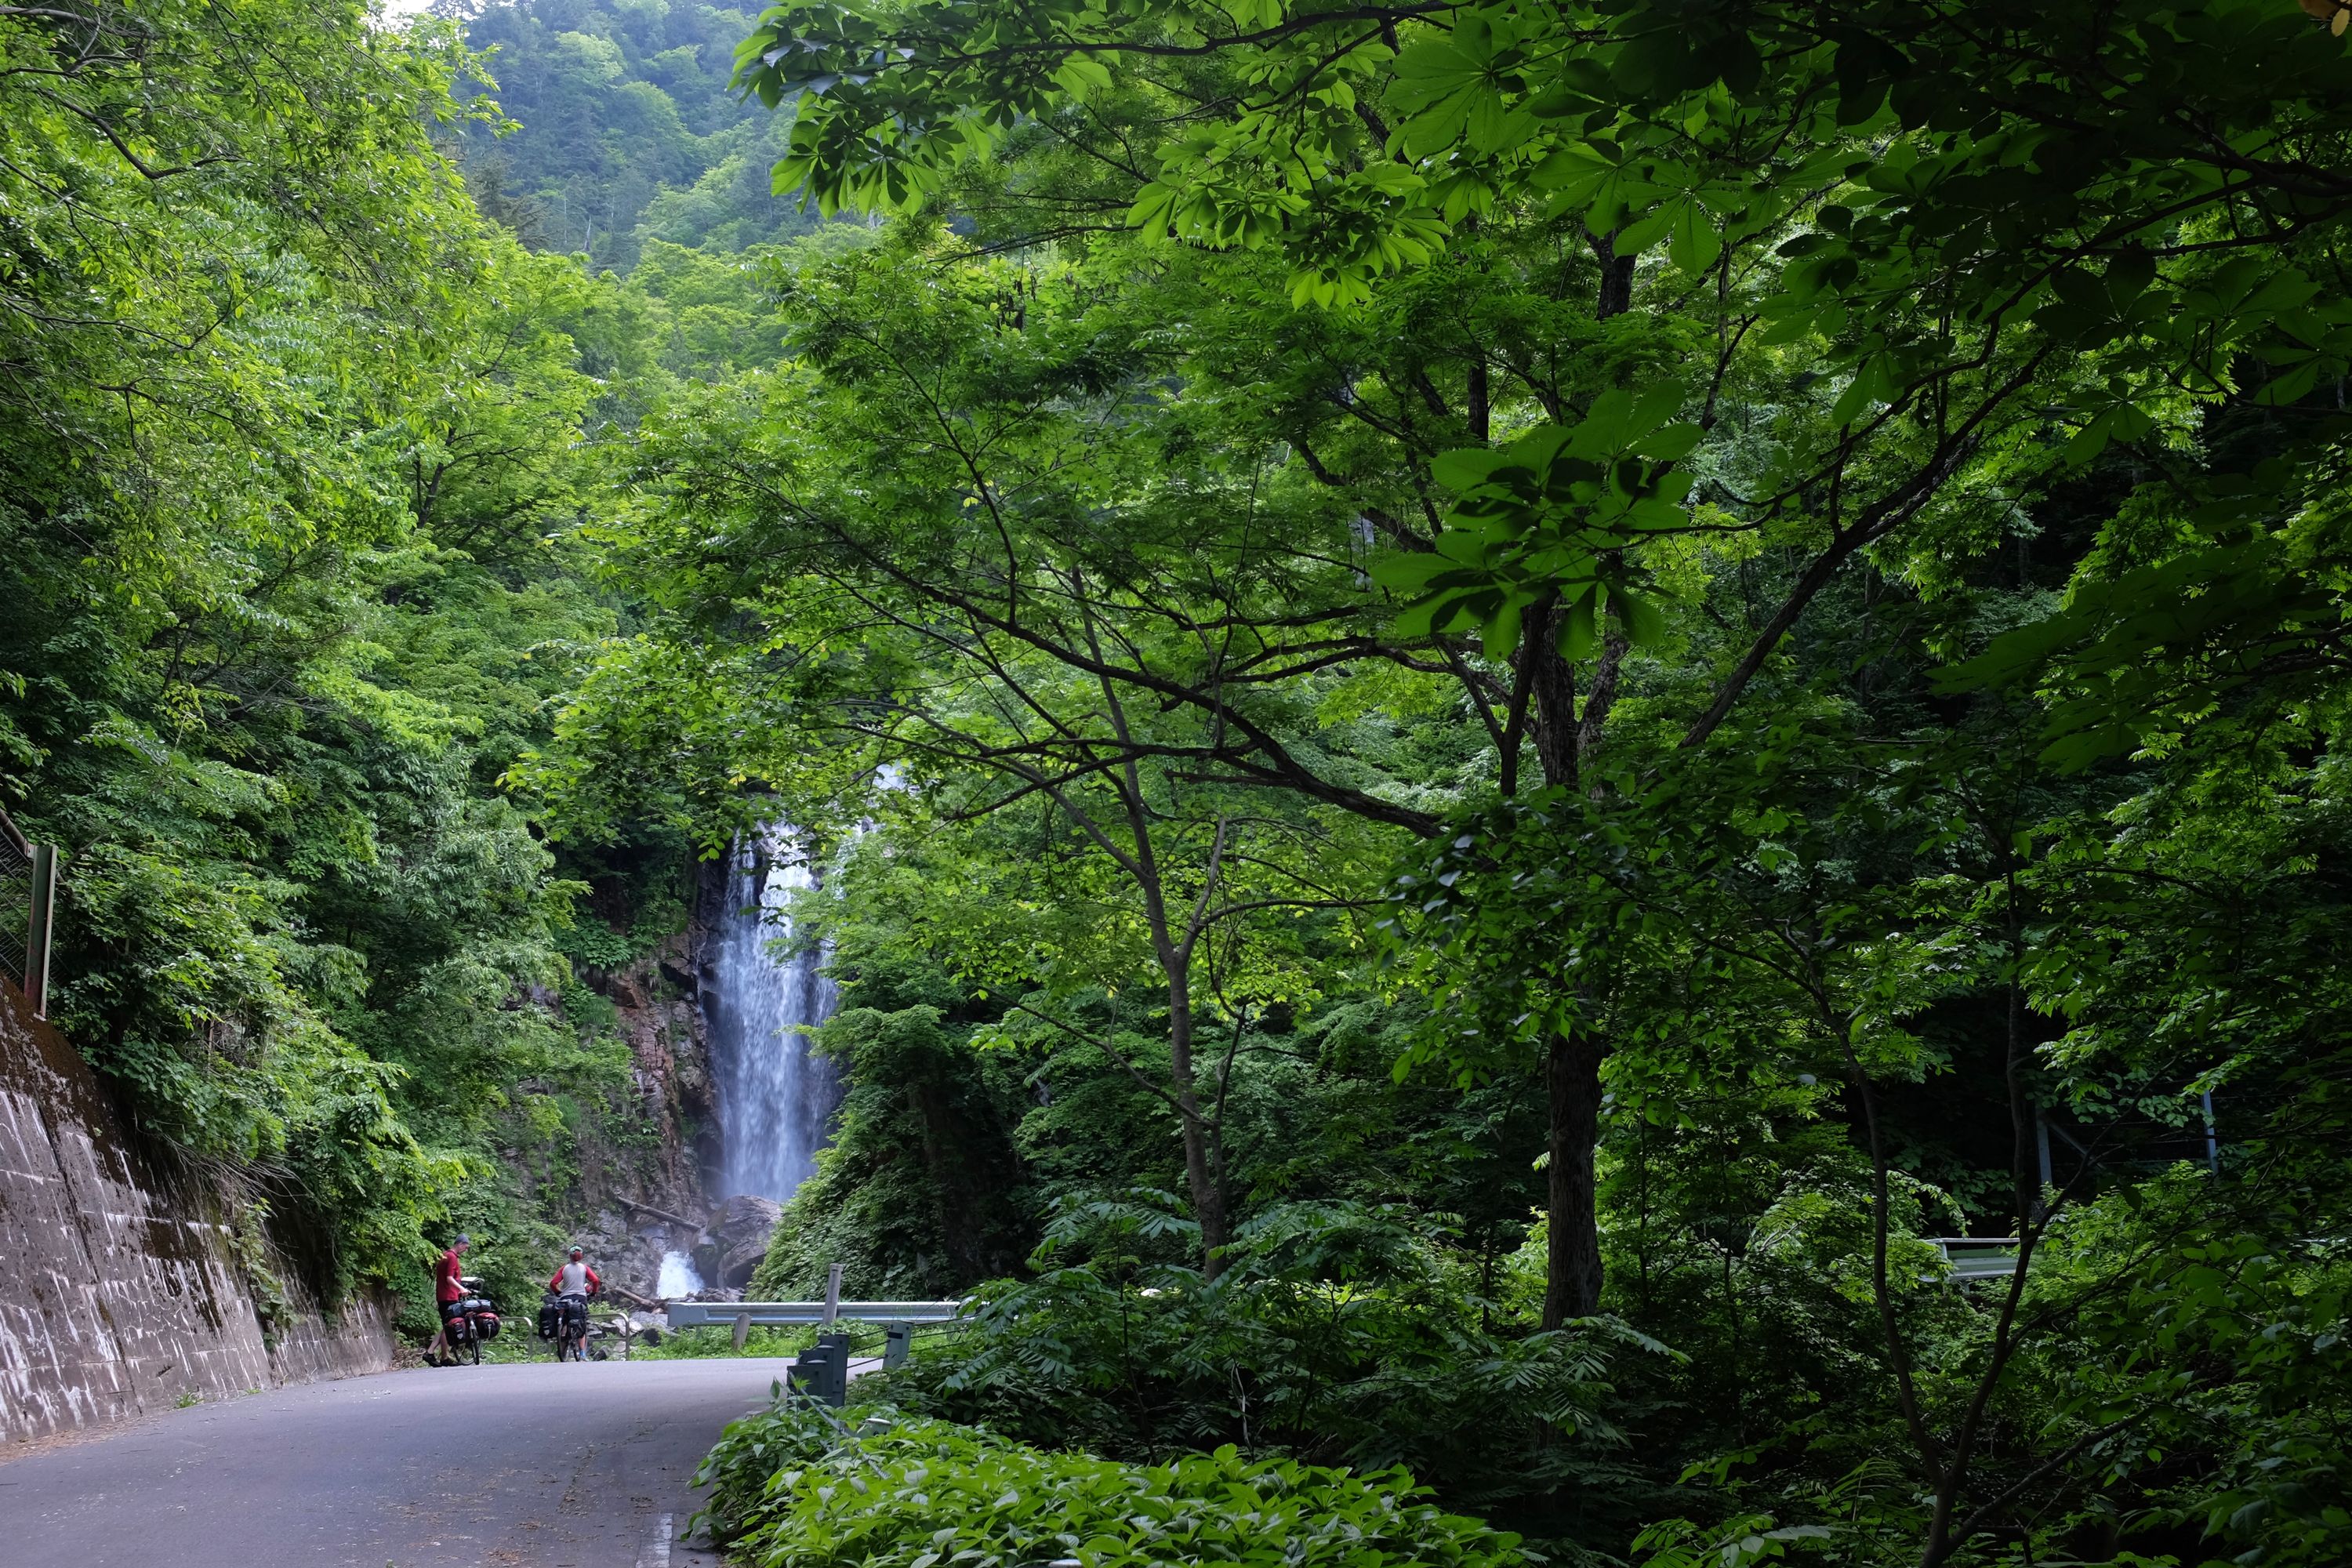 A pair of cyclists look at a waterfall in a dense mountain forest.